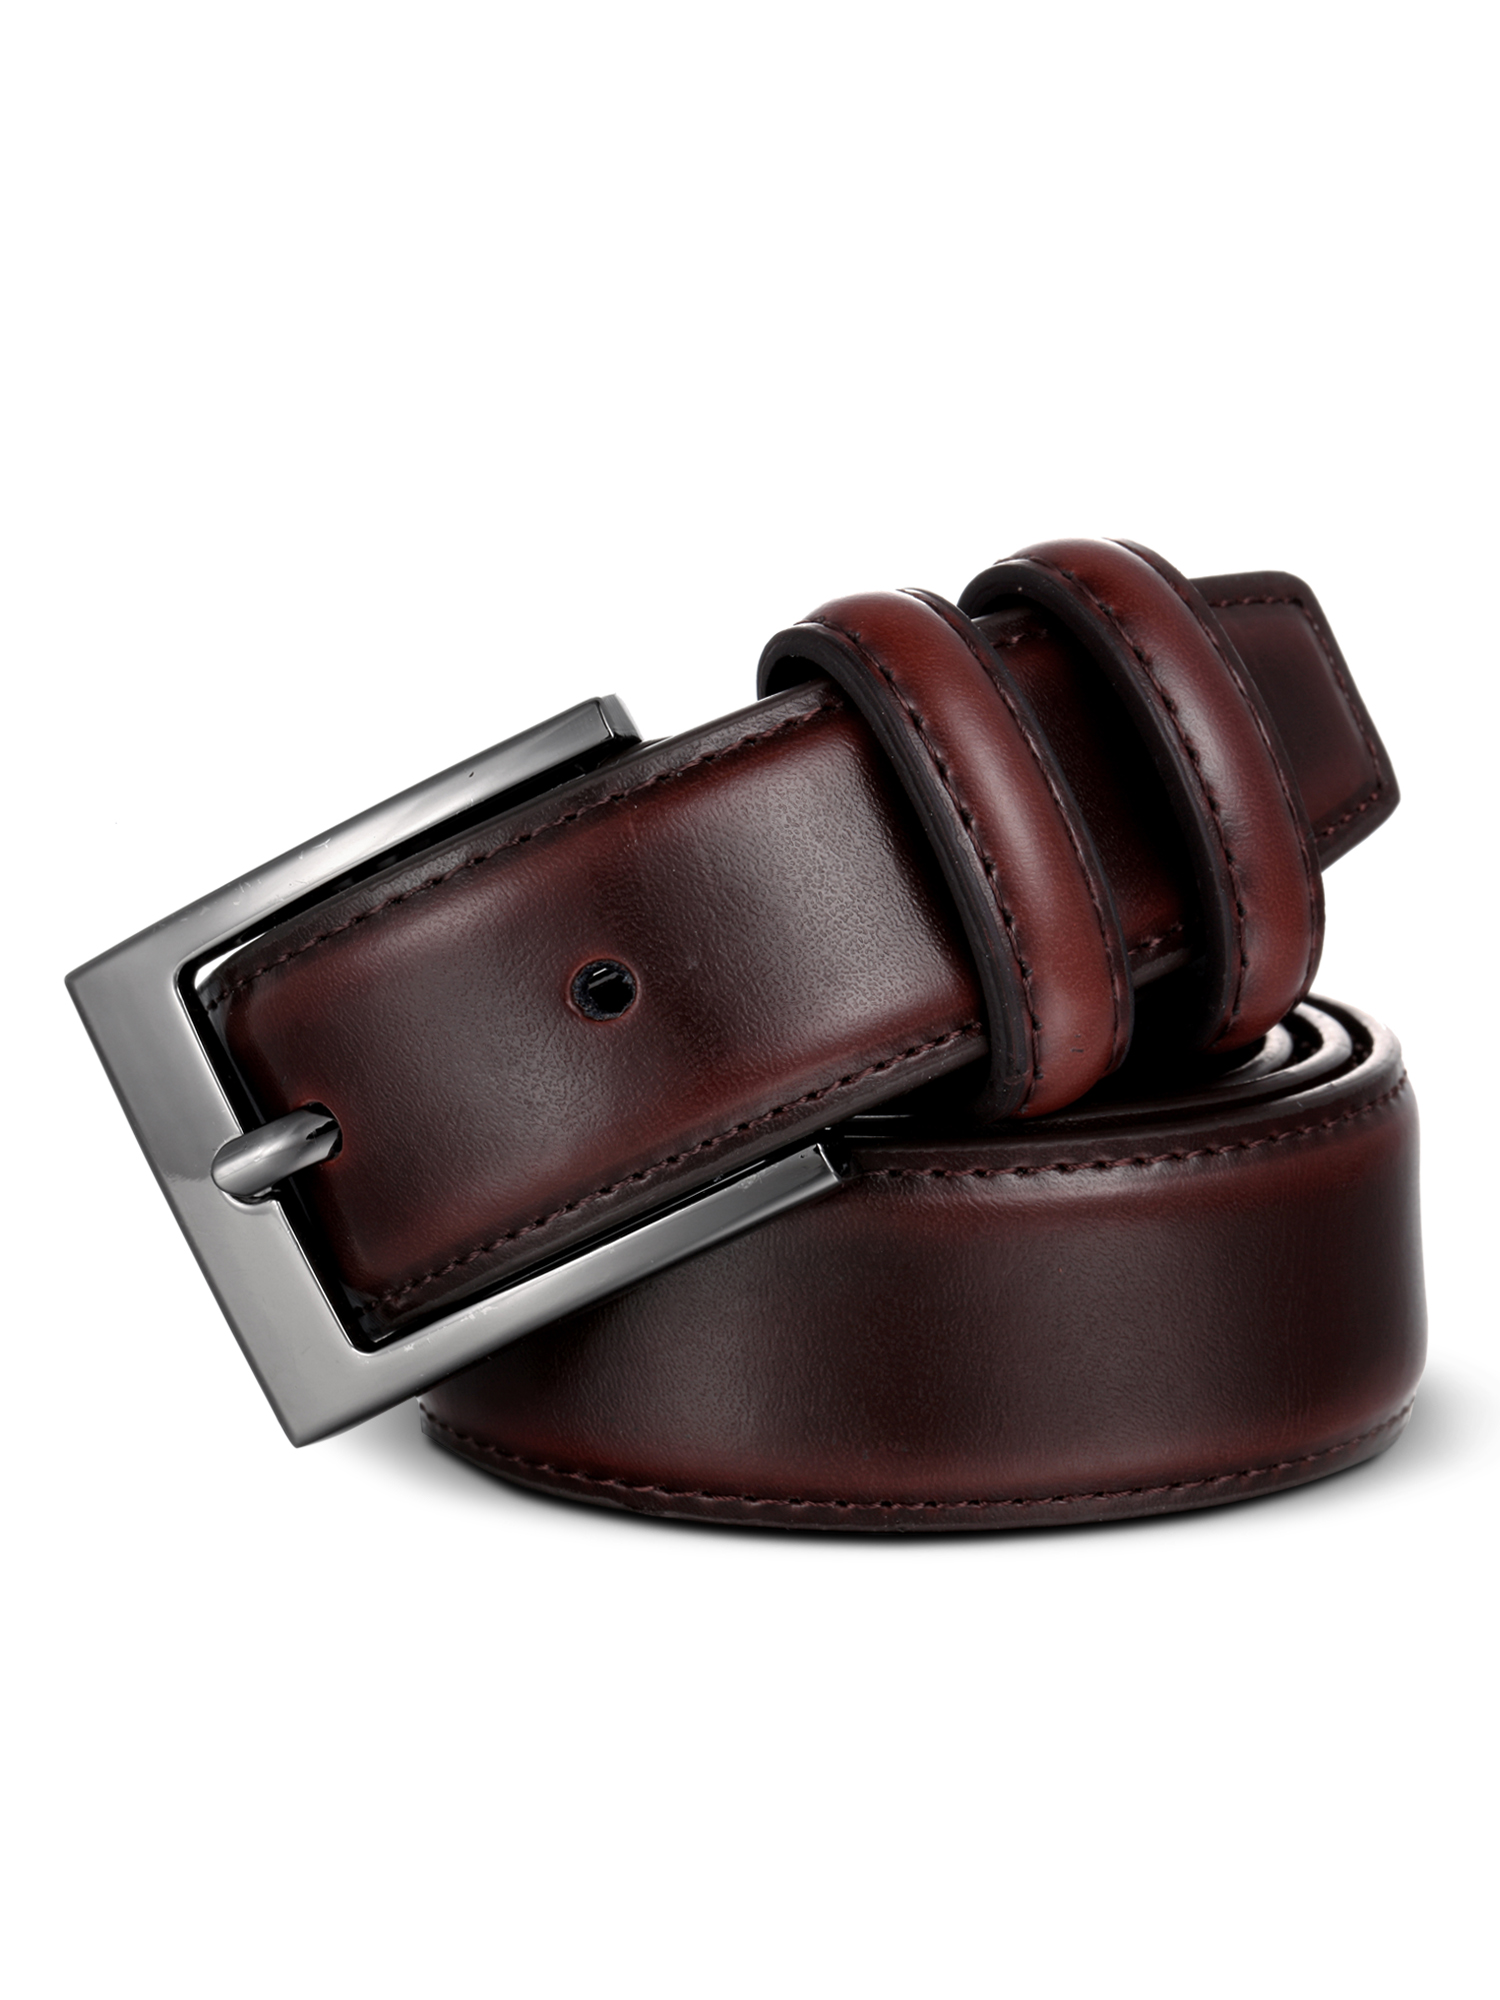 Marino’s Men Genuine Leather Dress Belt with Single Prong Buckle - Pack of 2 - image 3 of 6